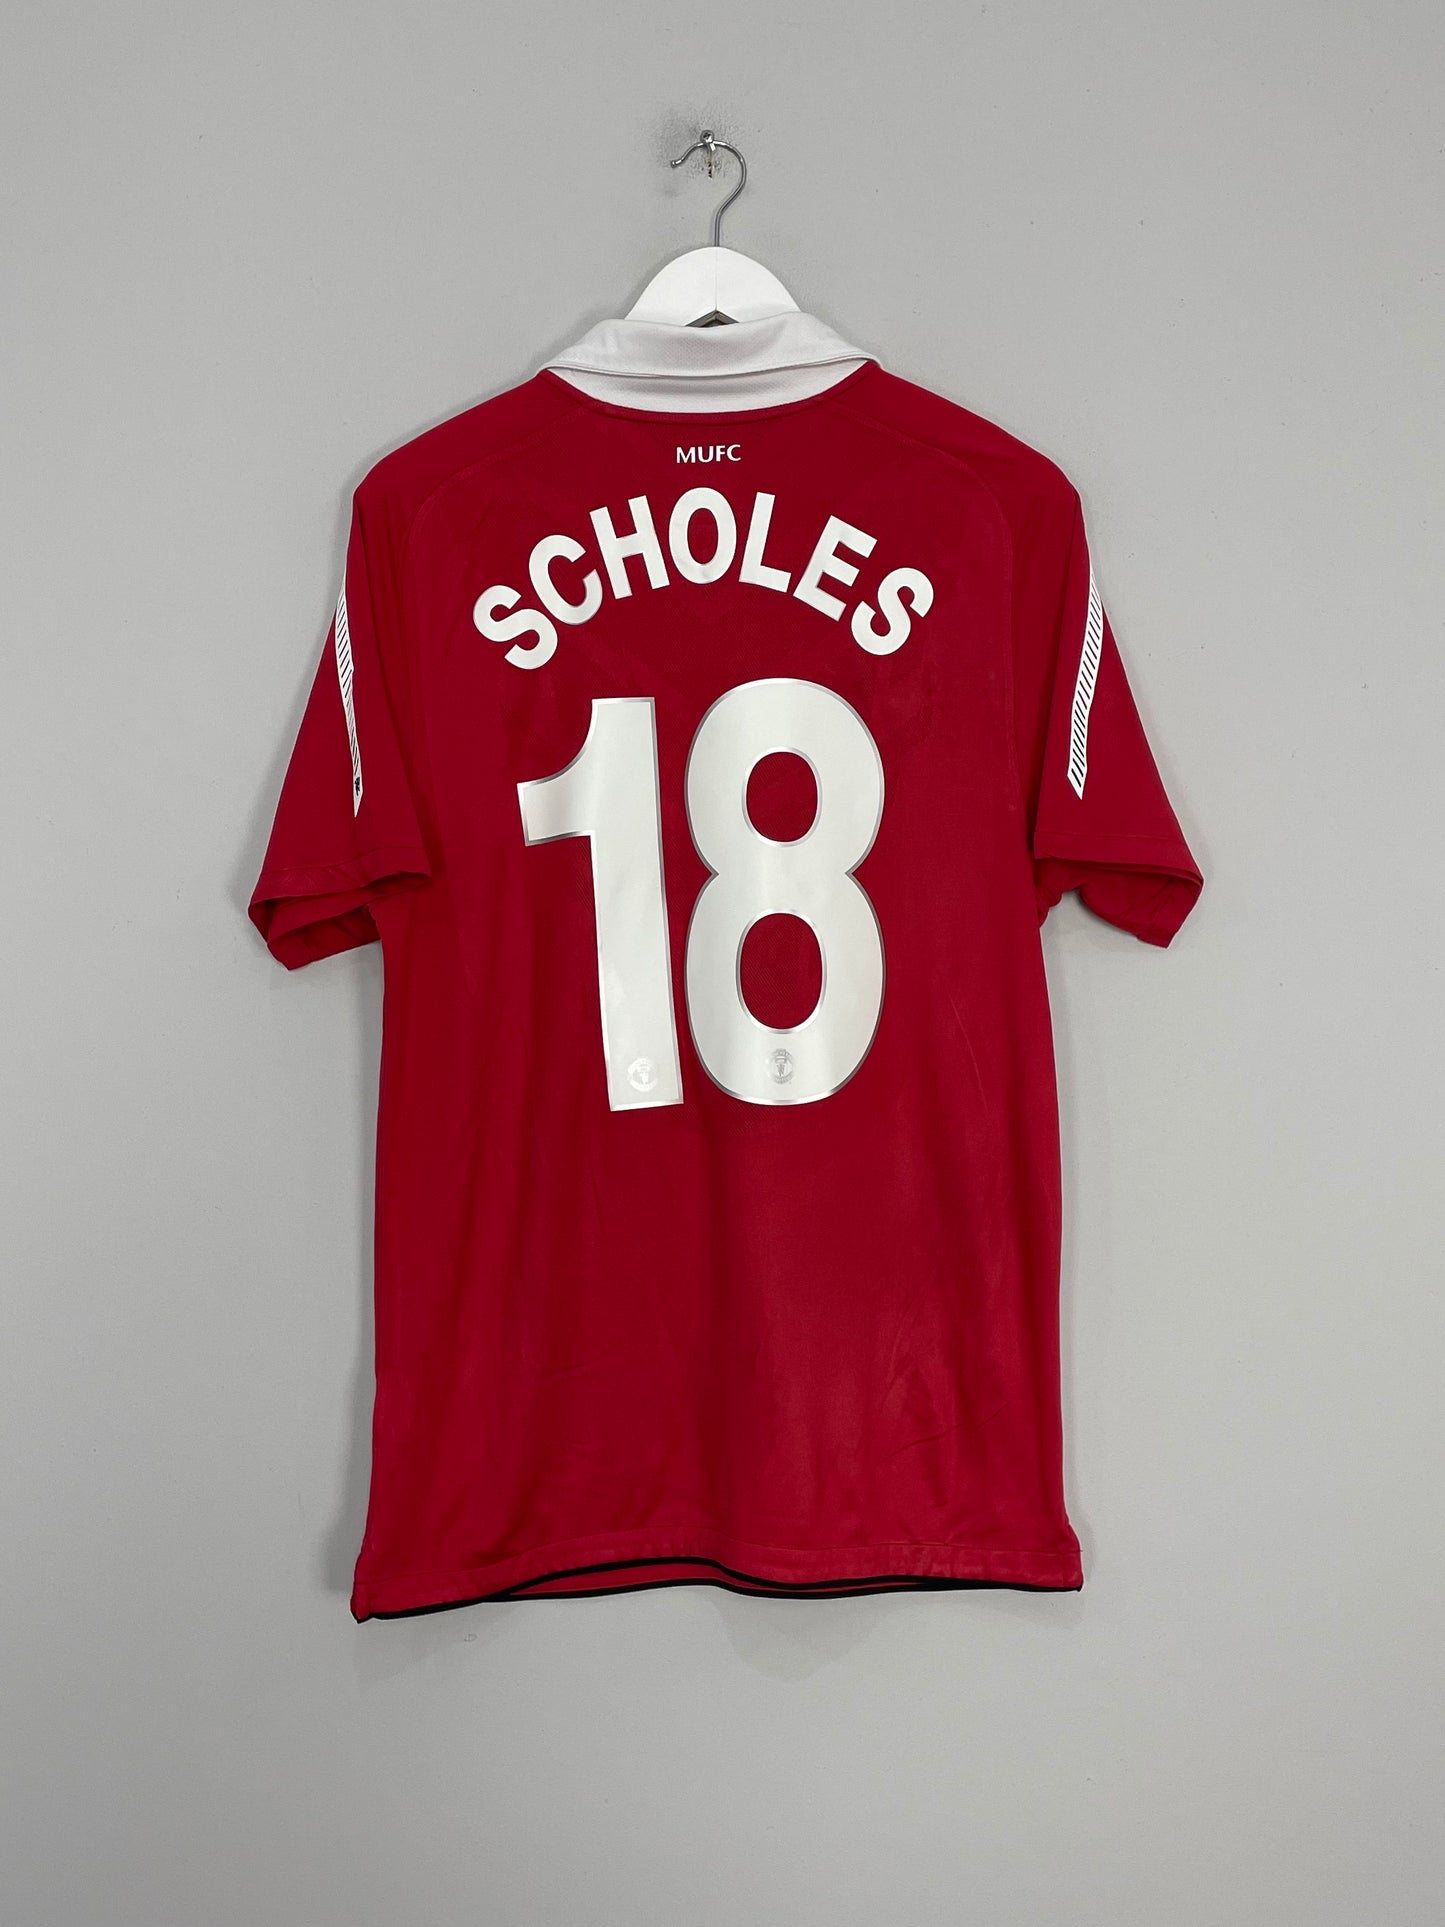 Image of the Manchester United Scholes shirt from the 2010/11 season